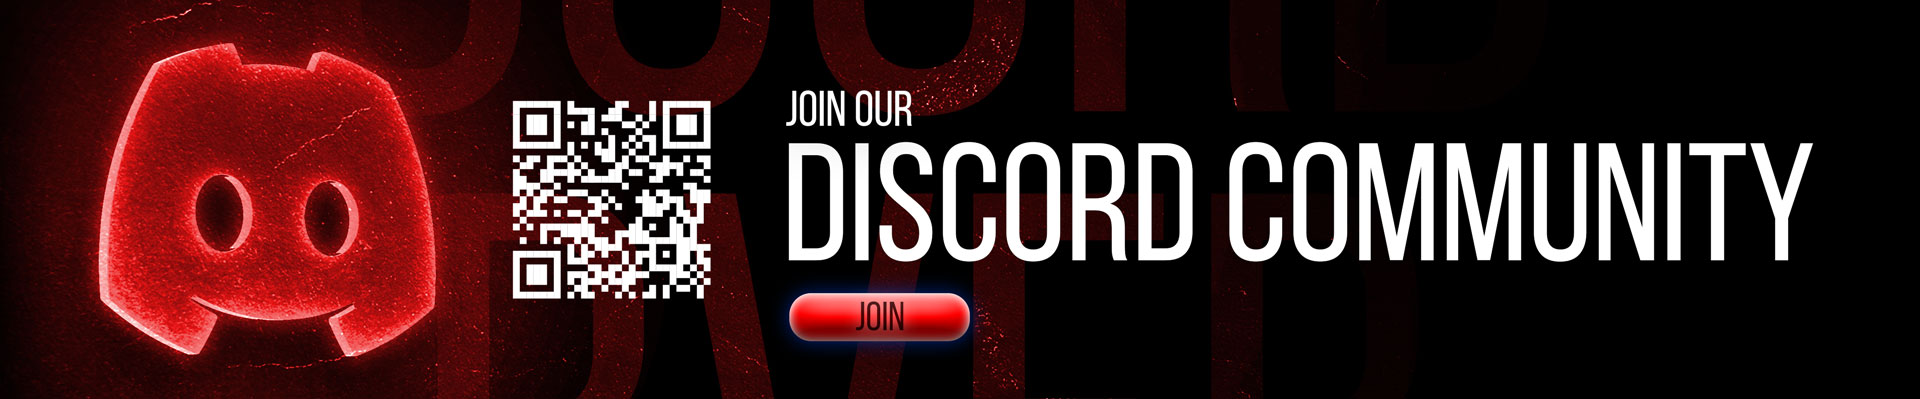 join our discord banner